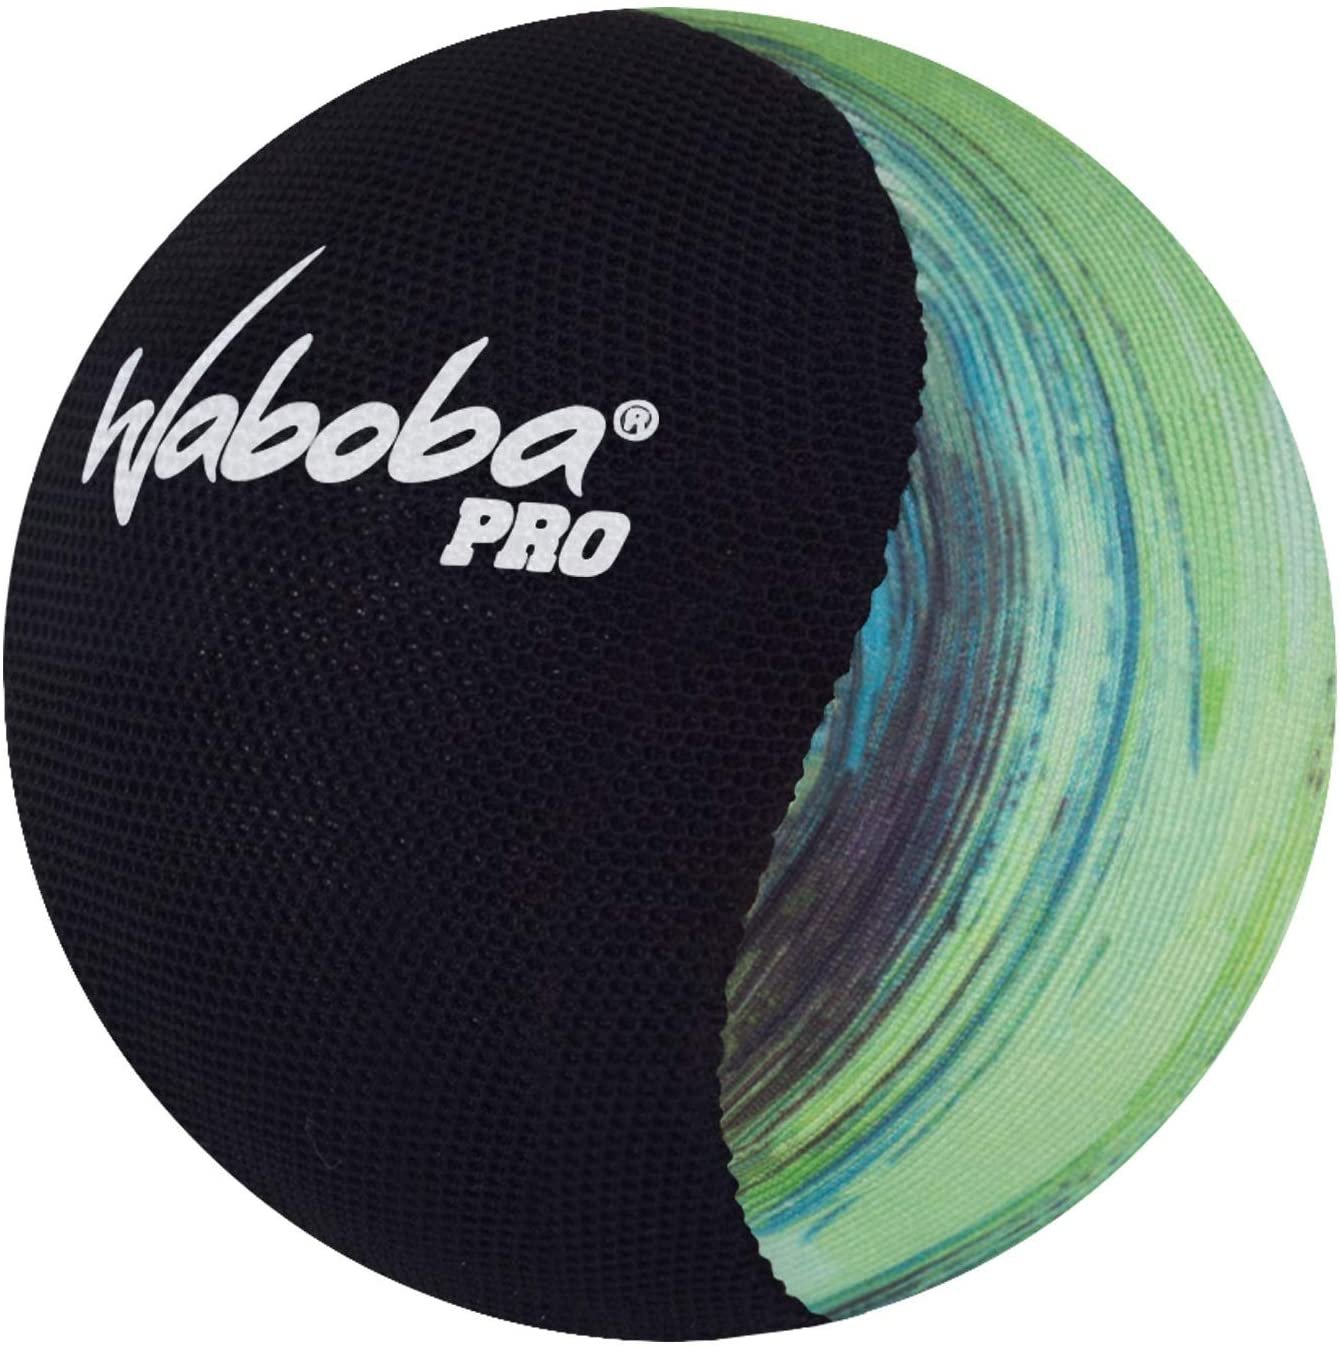 Waboba Pro Extreme Water Bouncing Ball - image 2 of 6